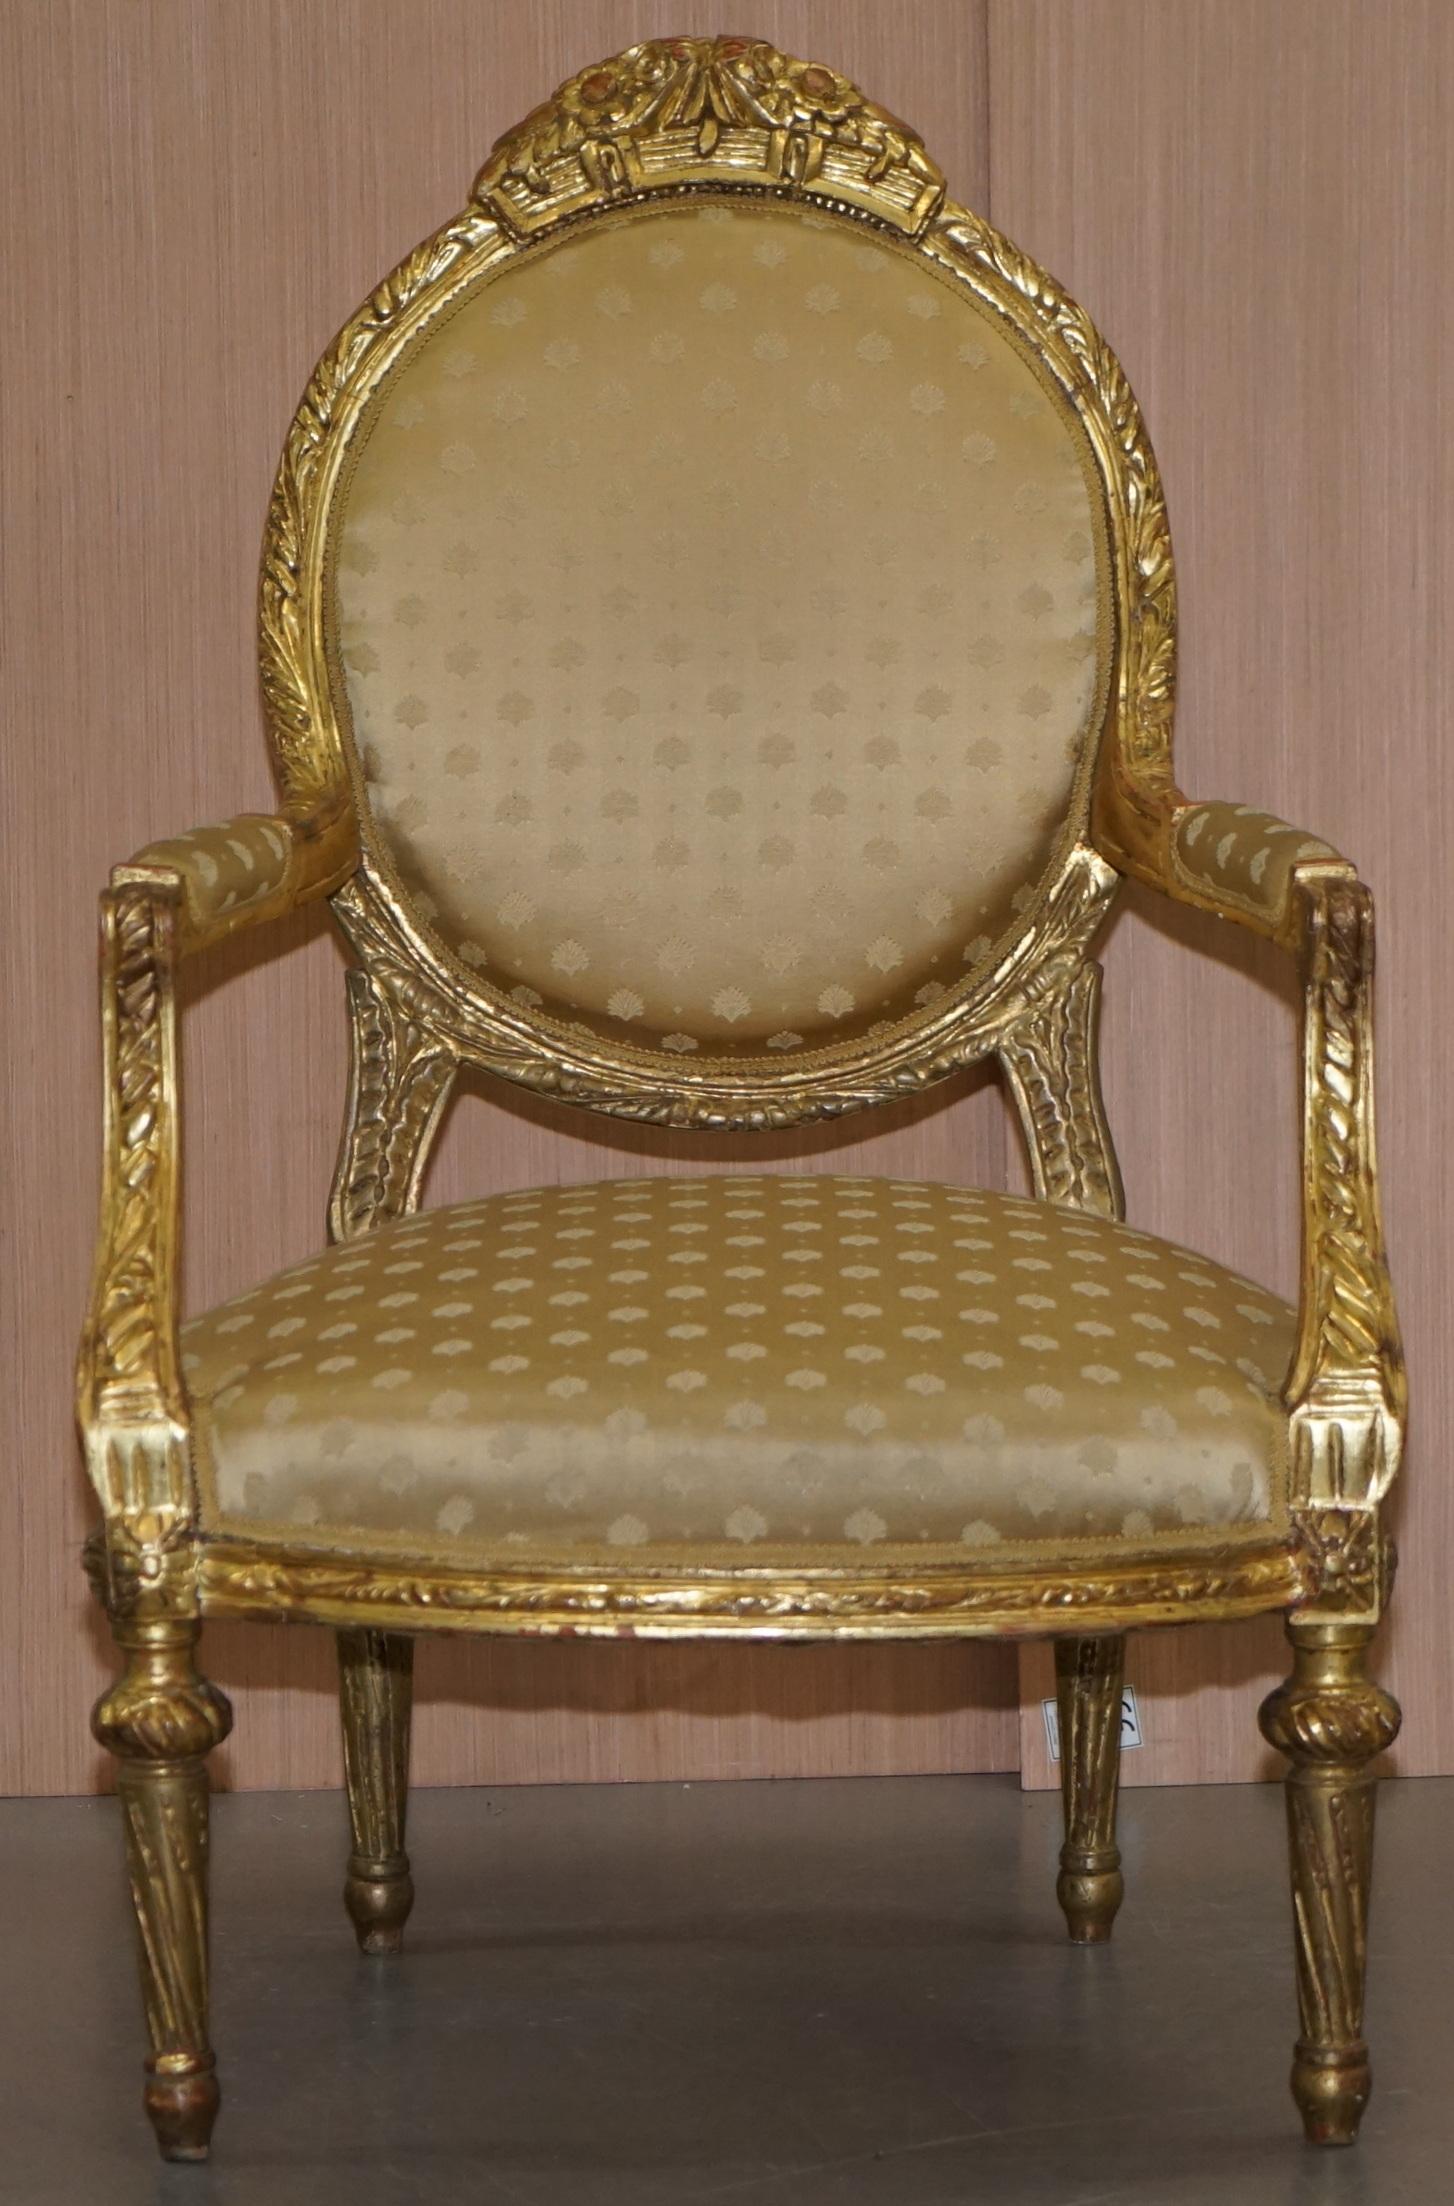 We are delighted to auction this original Napoleon III Giltwood, circa 1870 Salon Throne armchair which is part of a suite

This set includes a sofa and one other matching armchair, this one listed here is in perfect condition, the other armchair